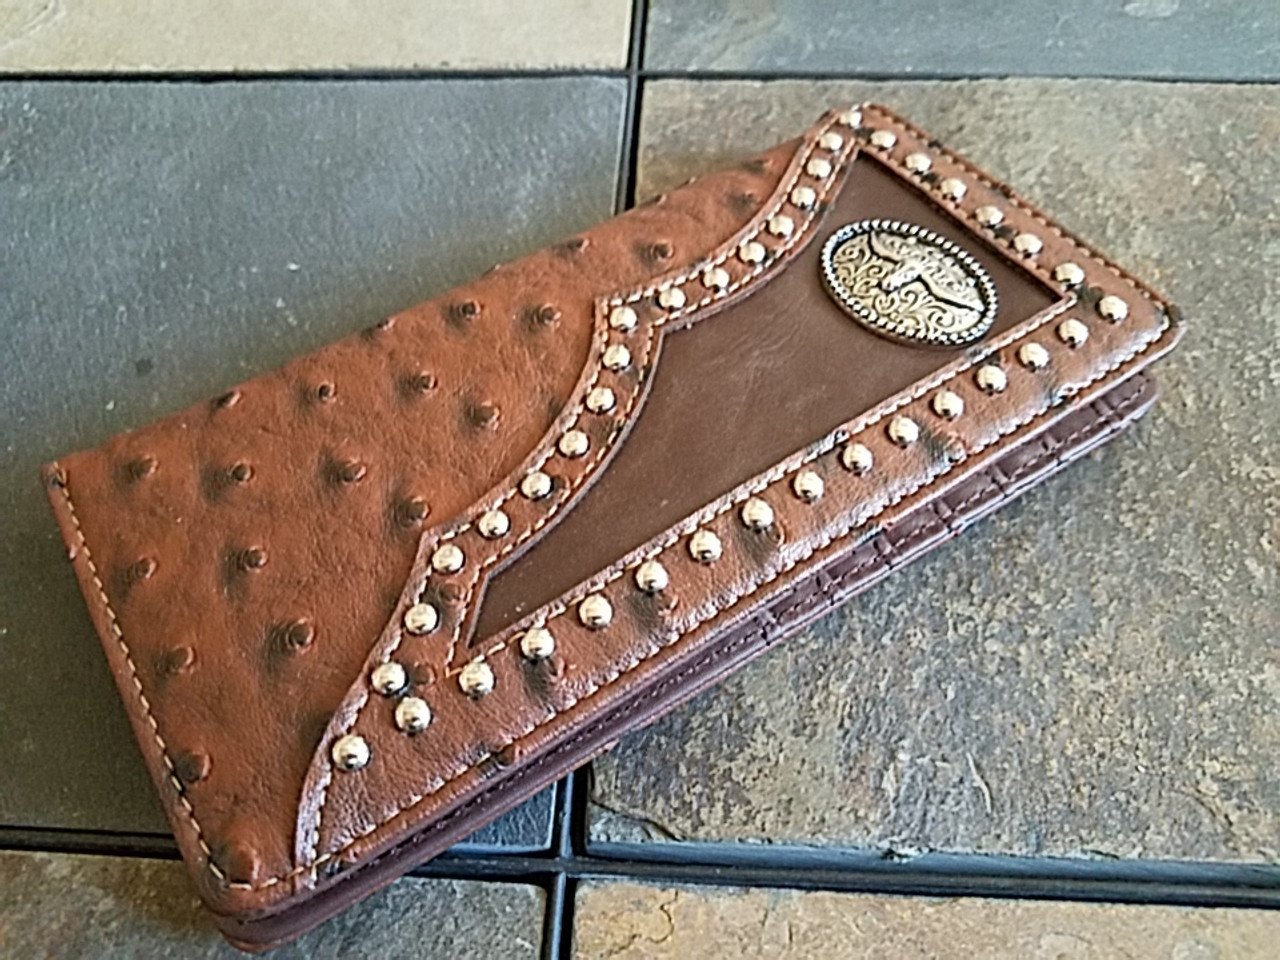 Texas Leather Hand Tooled Leather Wallet with Cowhide & Concho